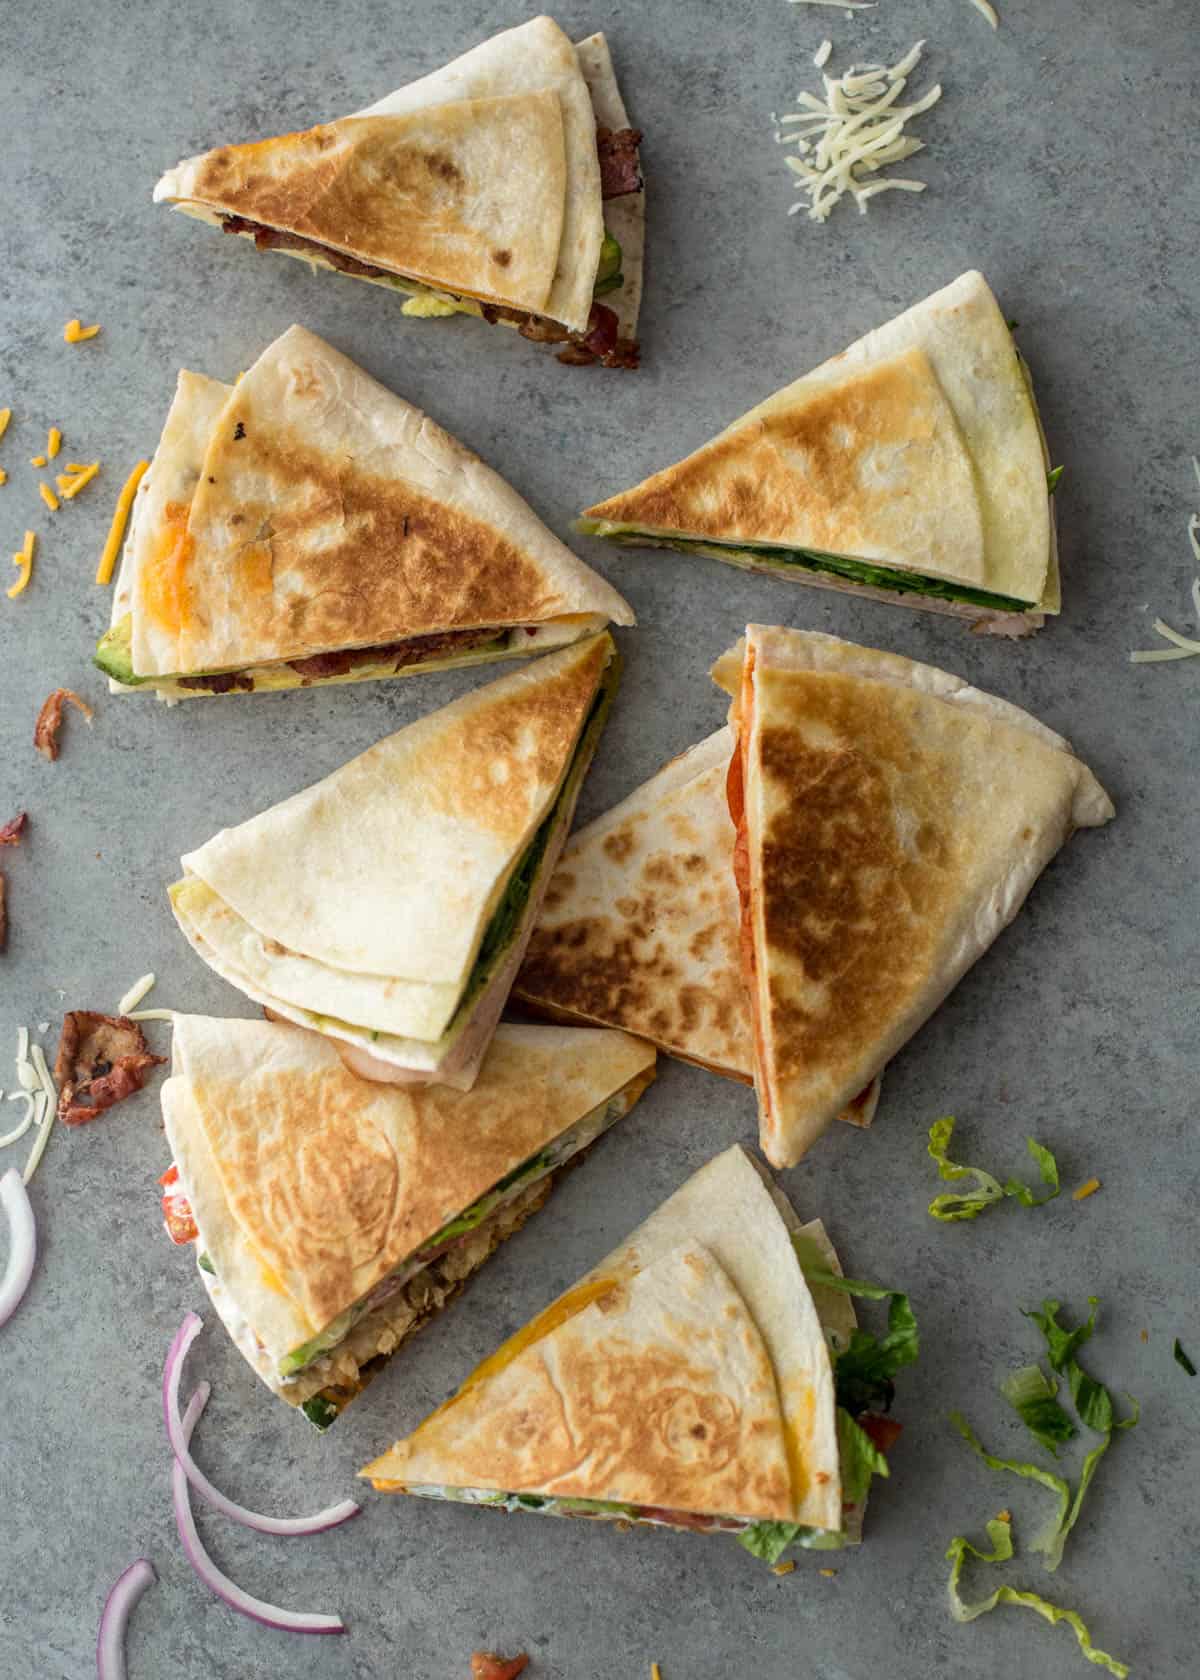 Tortilla Trend How-To (with recipes) | Inquiring Chef